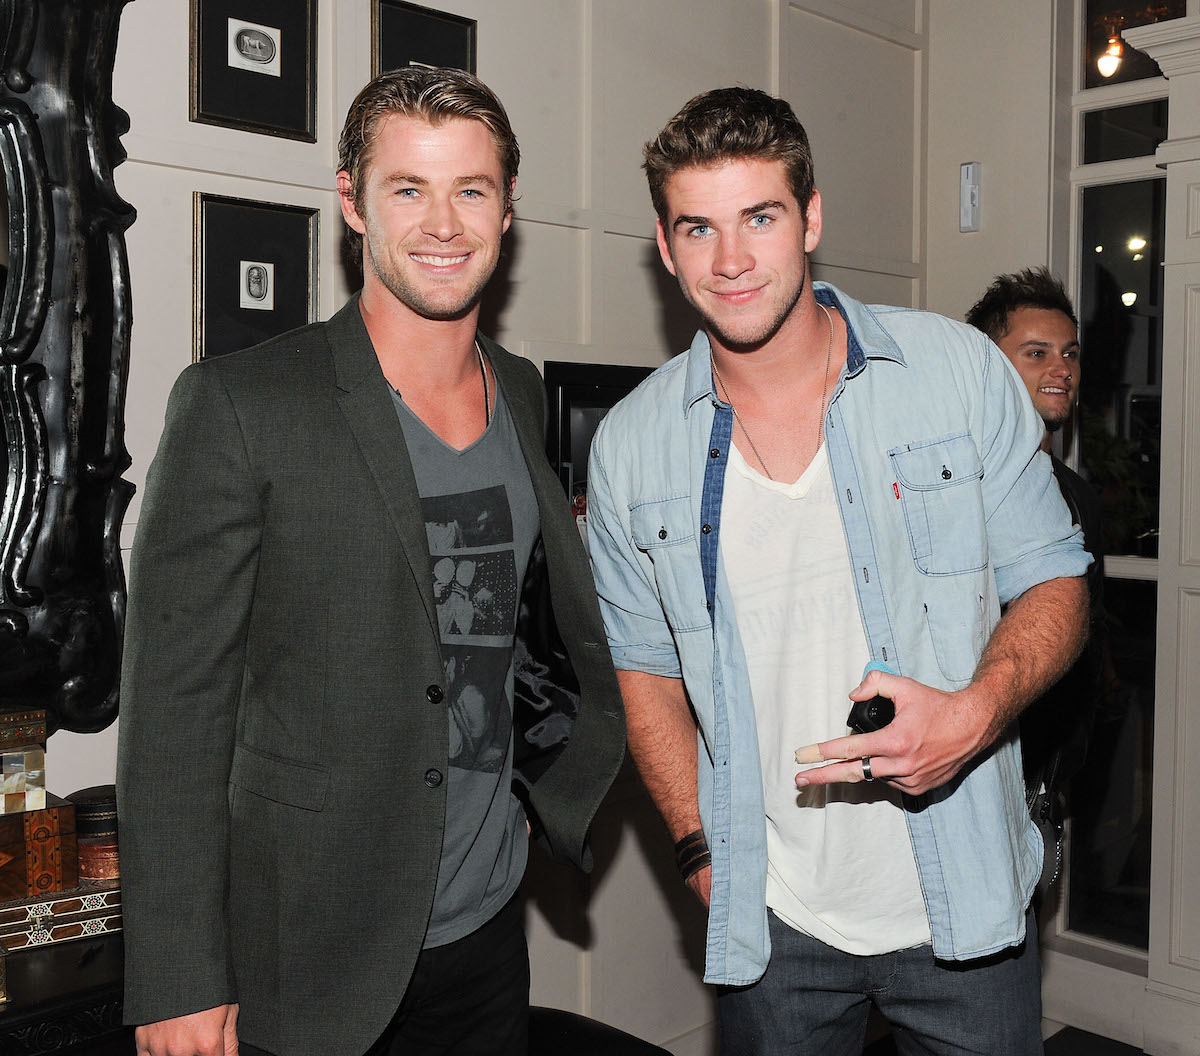 Actors Chris Hemsworth and Liam Hemsworth at a party in 2011